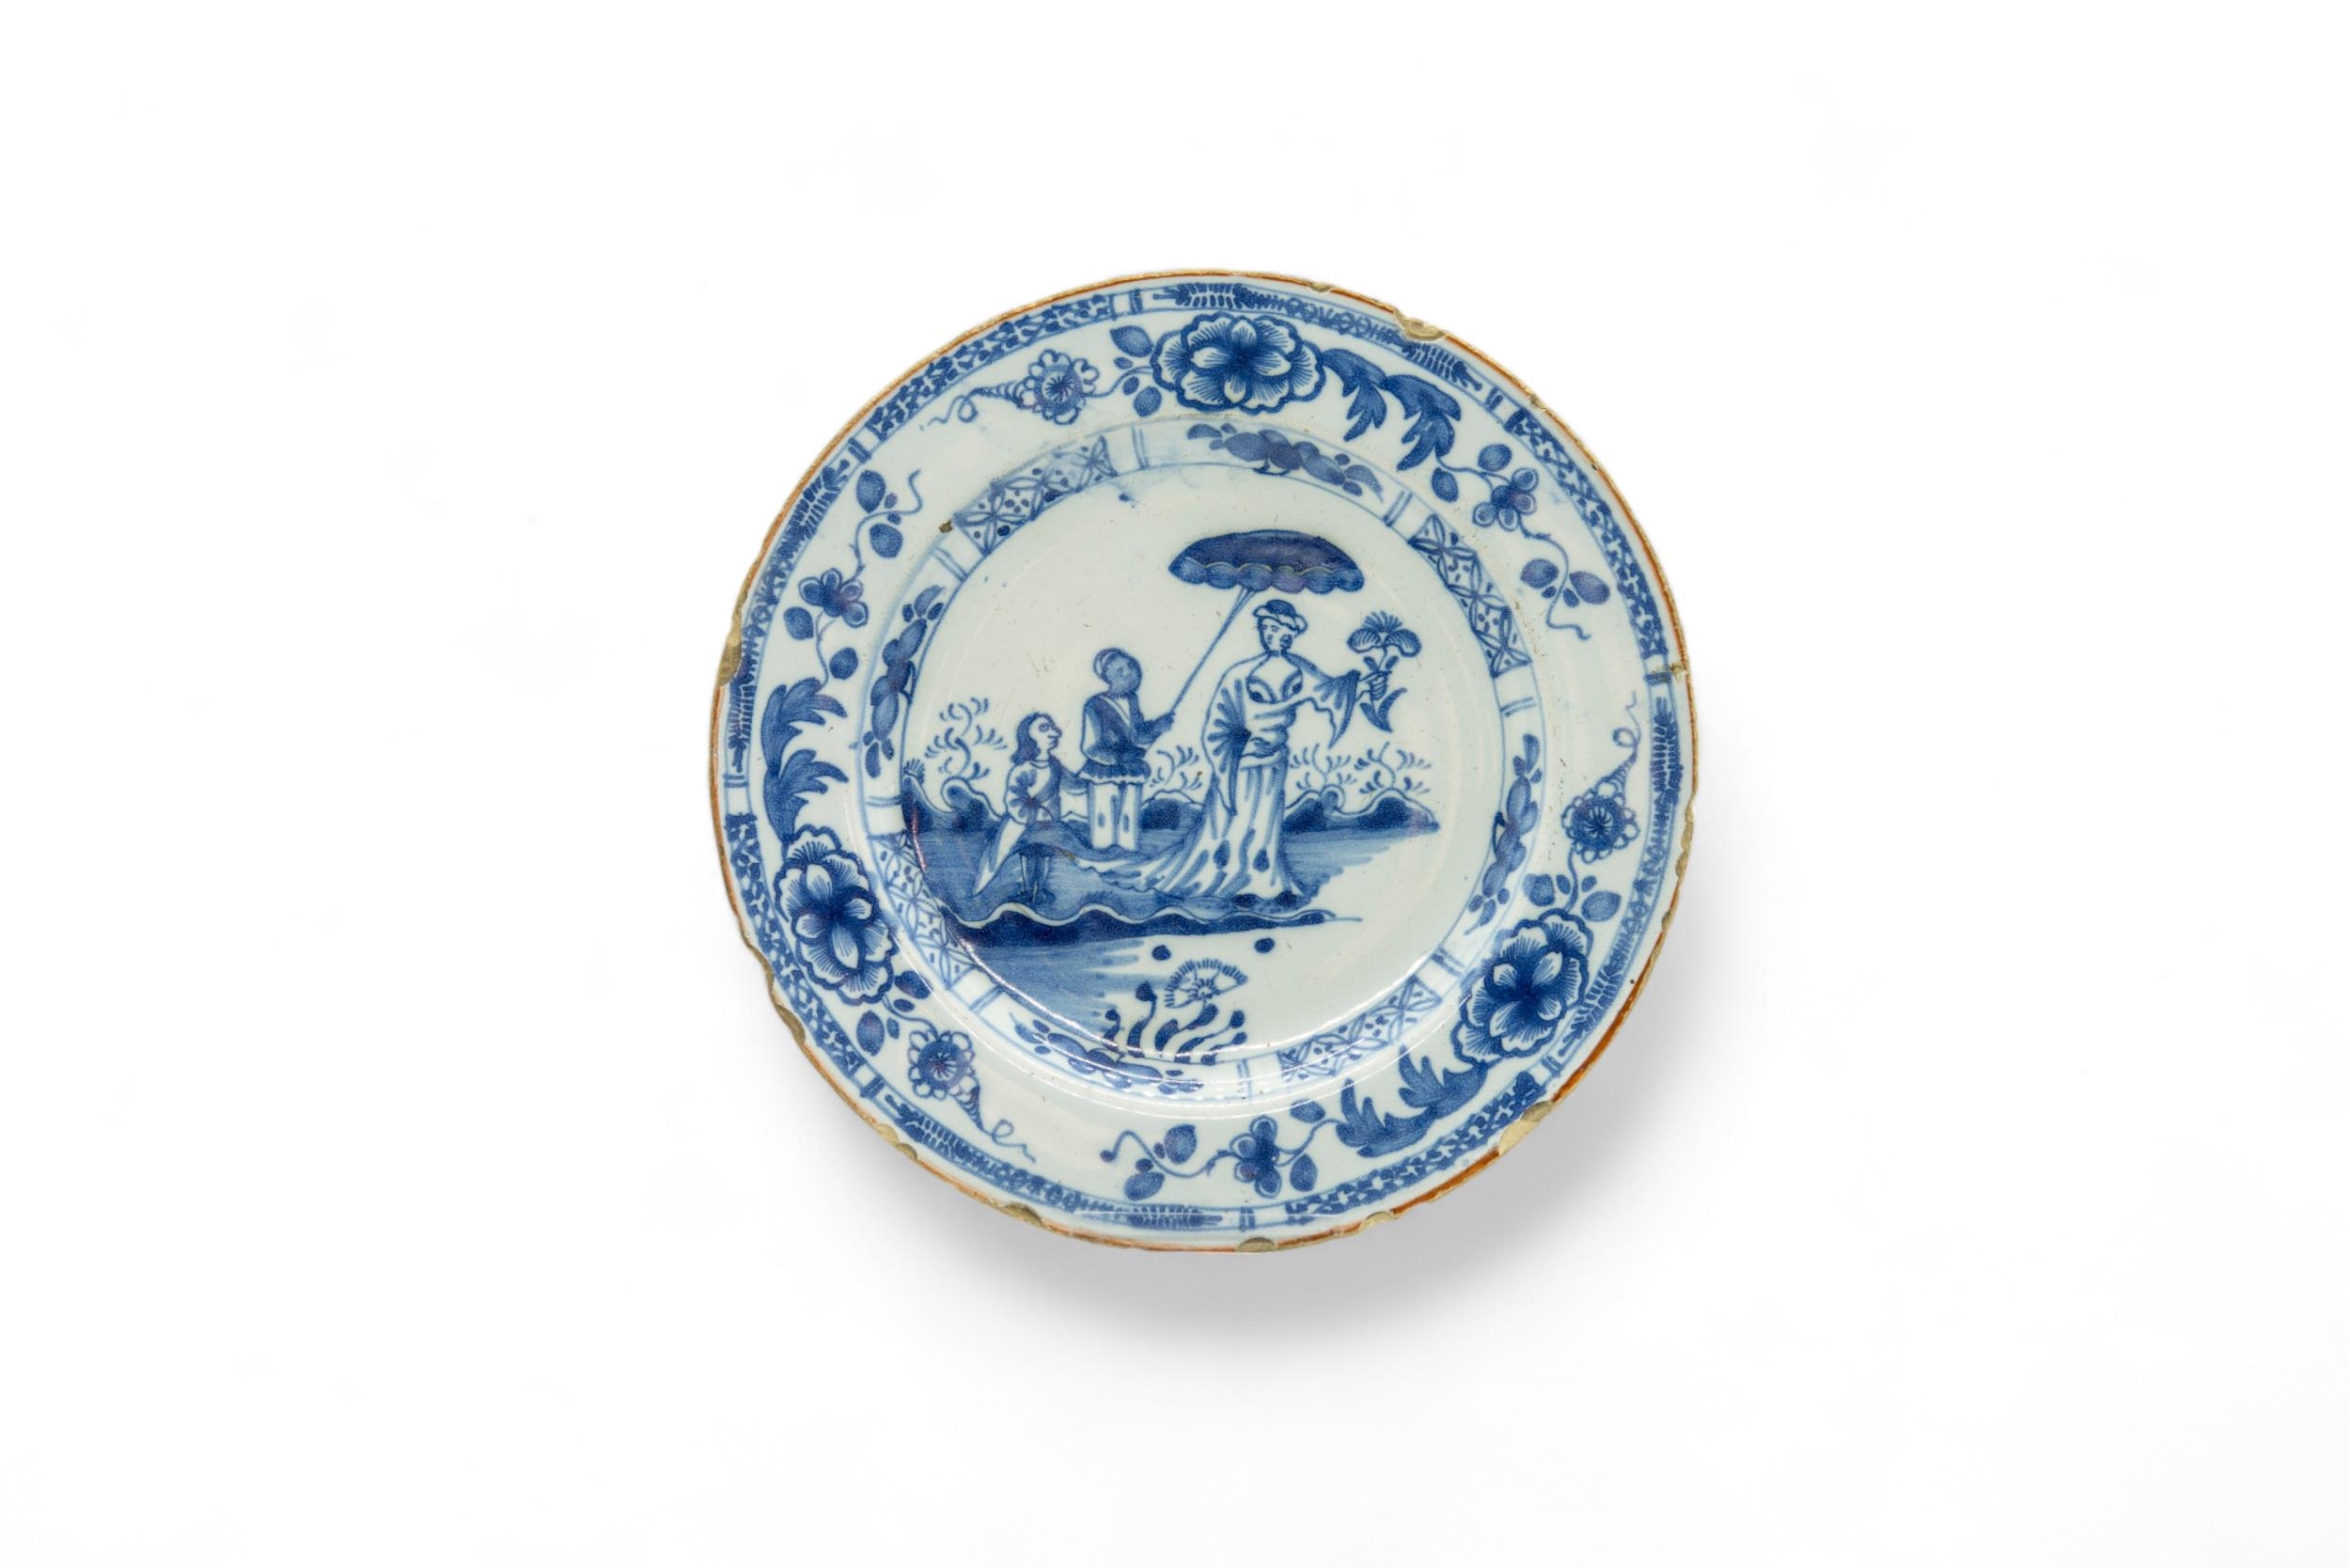 TEN DELFT PLATES 18th Century, including two with bianco sopro bianco decoration and one with a - Image 6 of 10